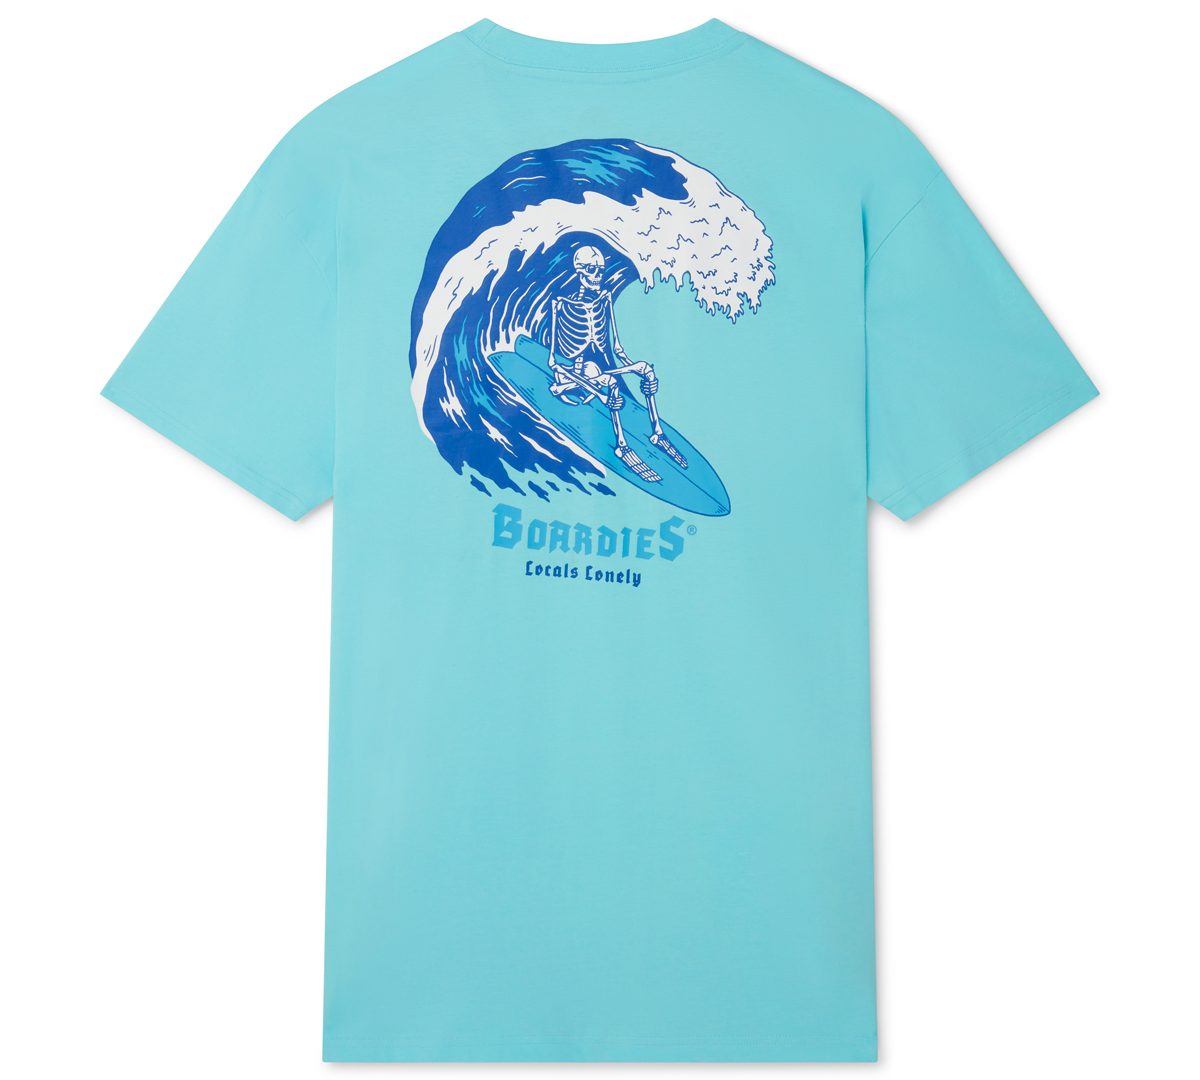 Boardies® Mens Locals Lonely T Shirt (BST611)_02